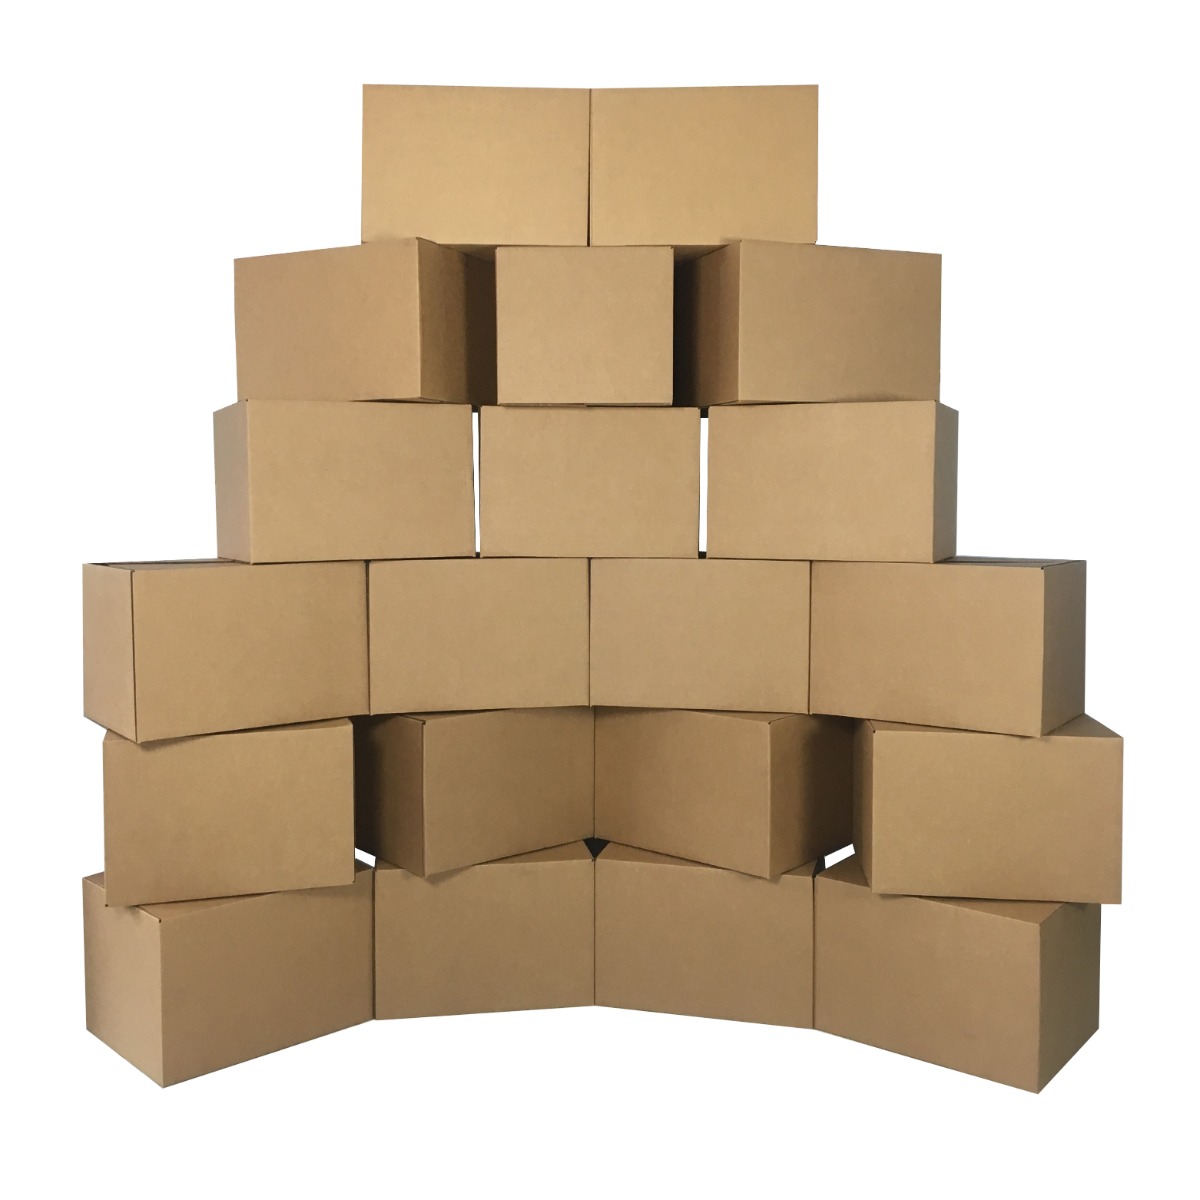 uBoxes Medium Cardboard Moving Boxes (20 Pack) 18 x 14 x 12-Inch - image 1 of 13